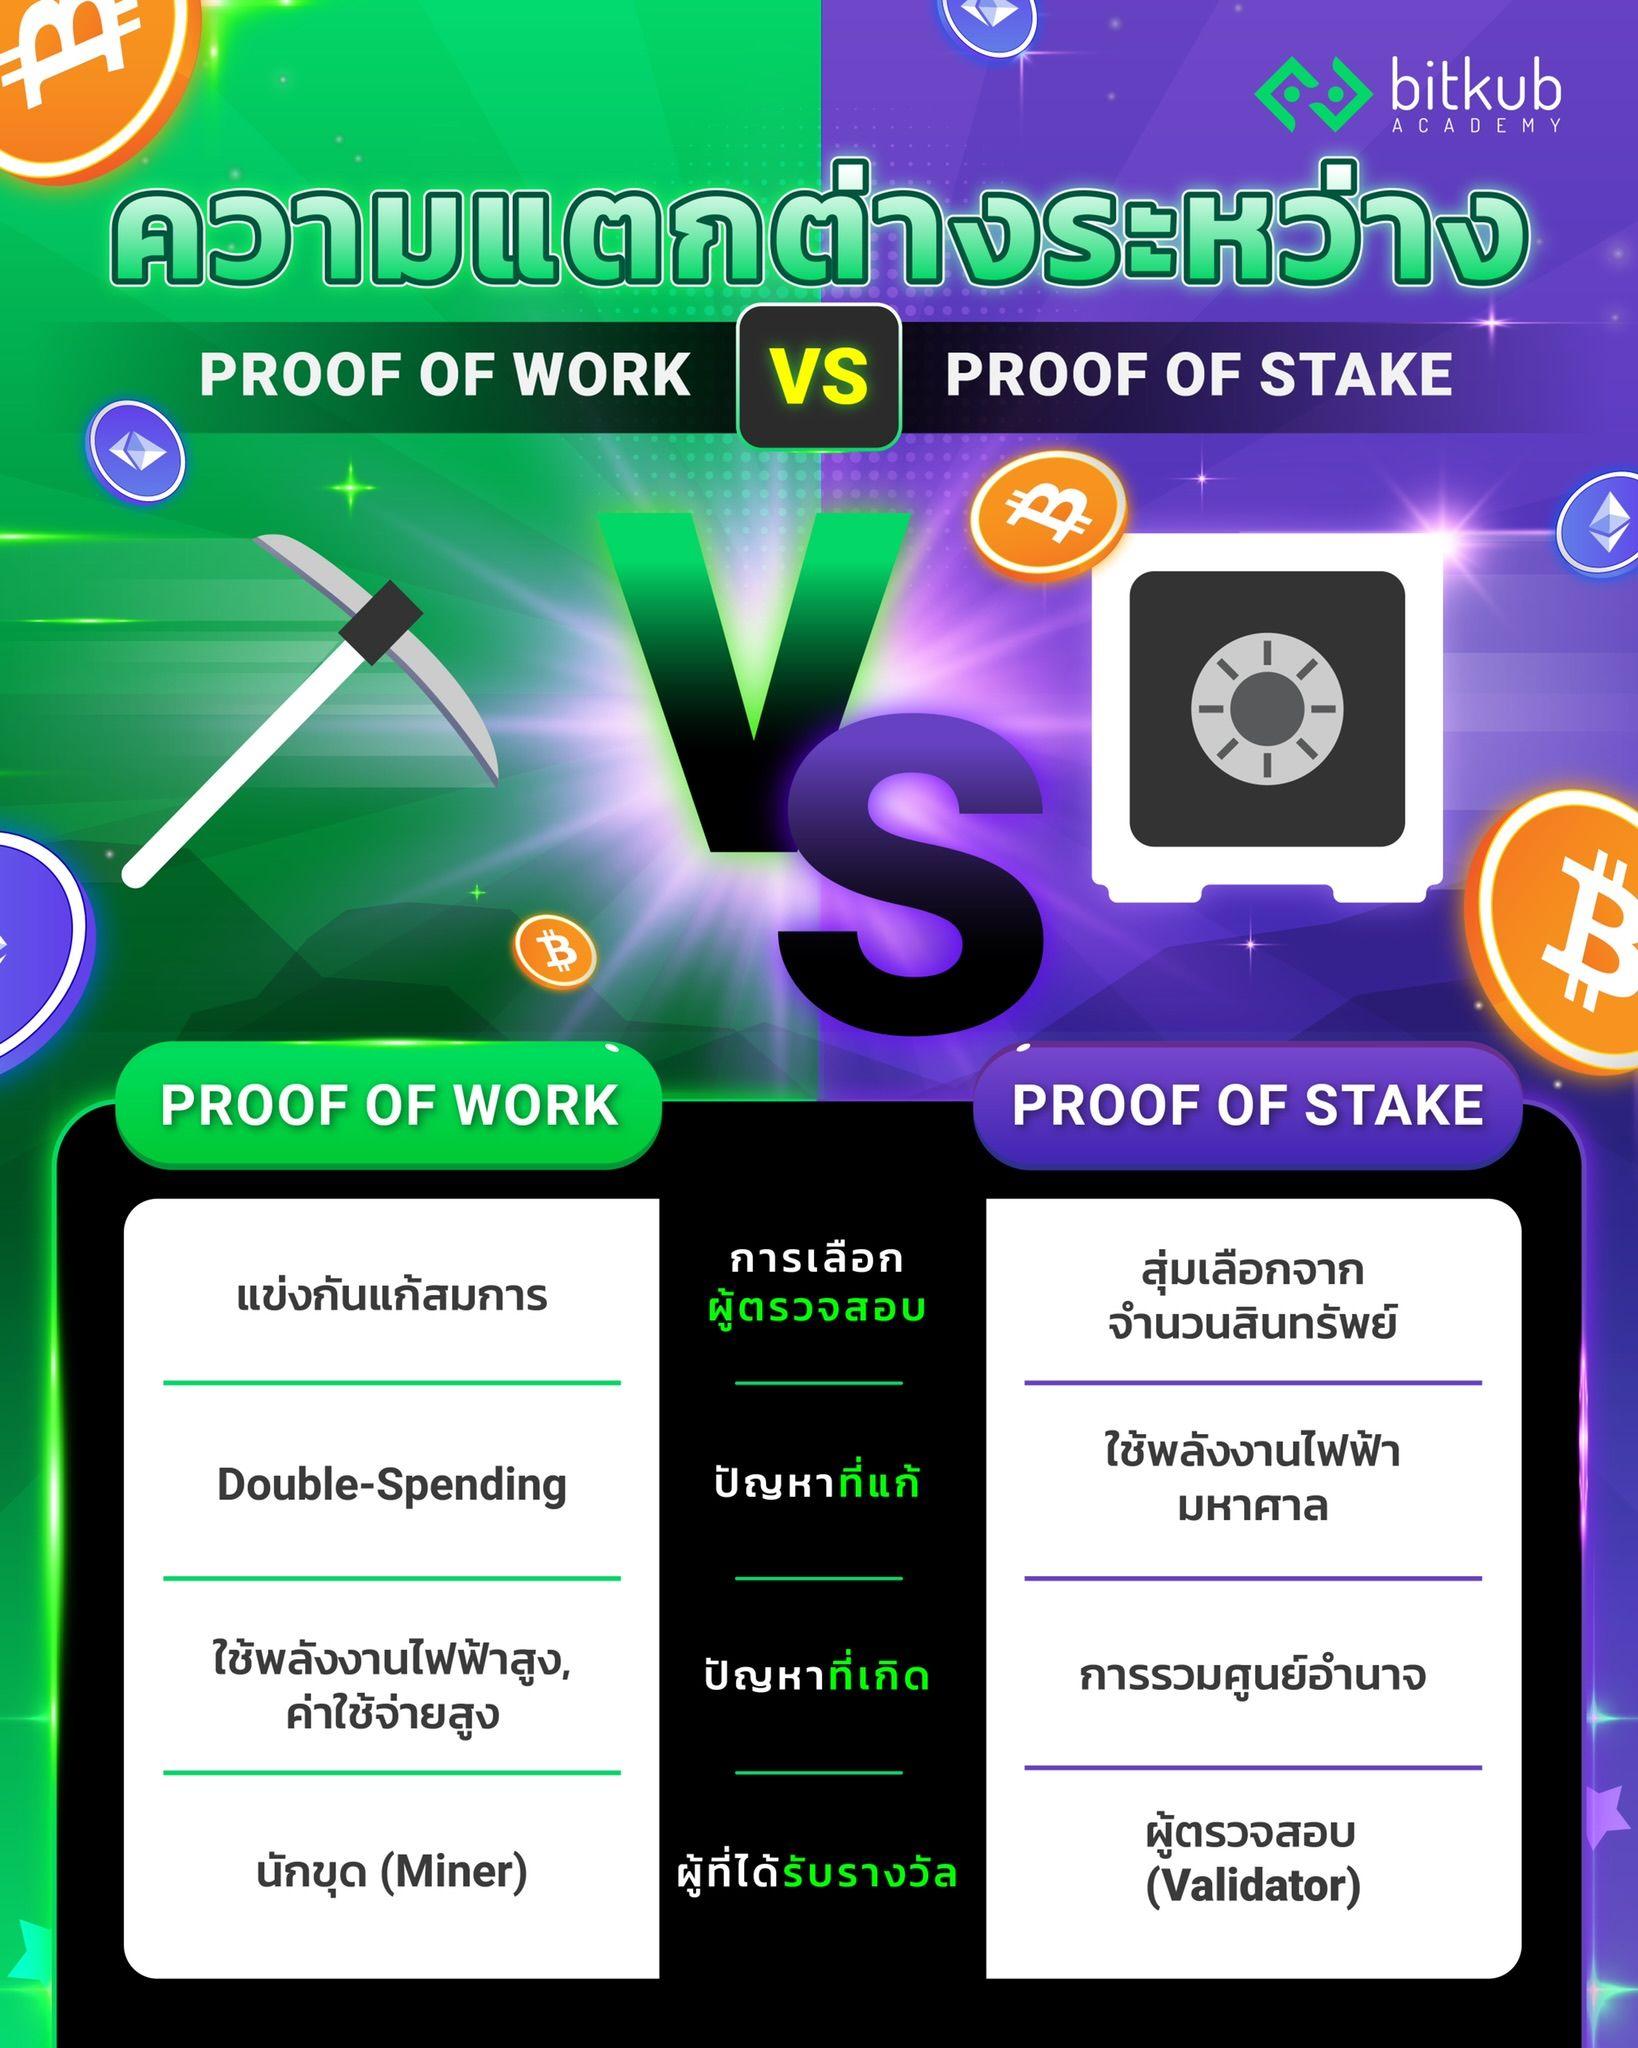 Proof of Work v.s. Proof of Stake